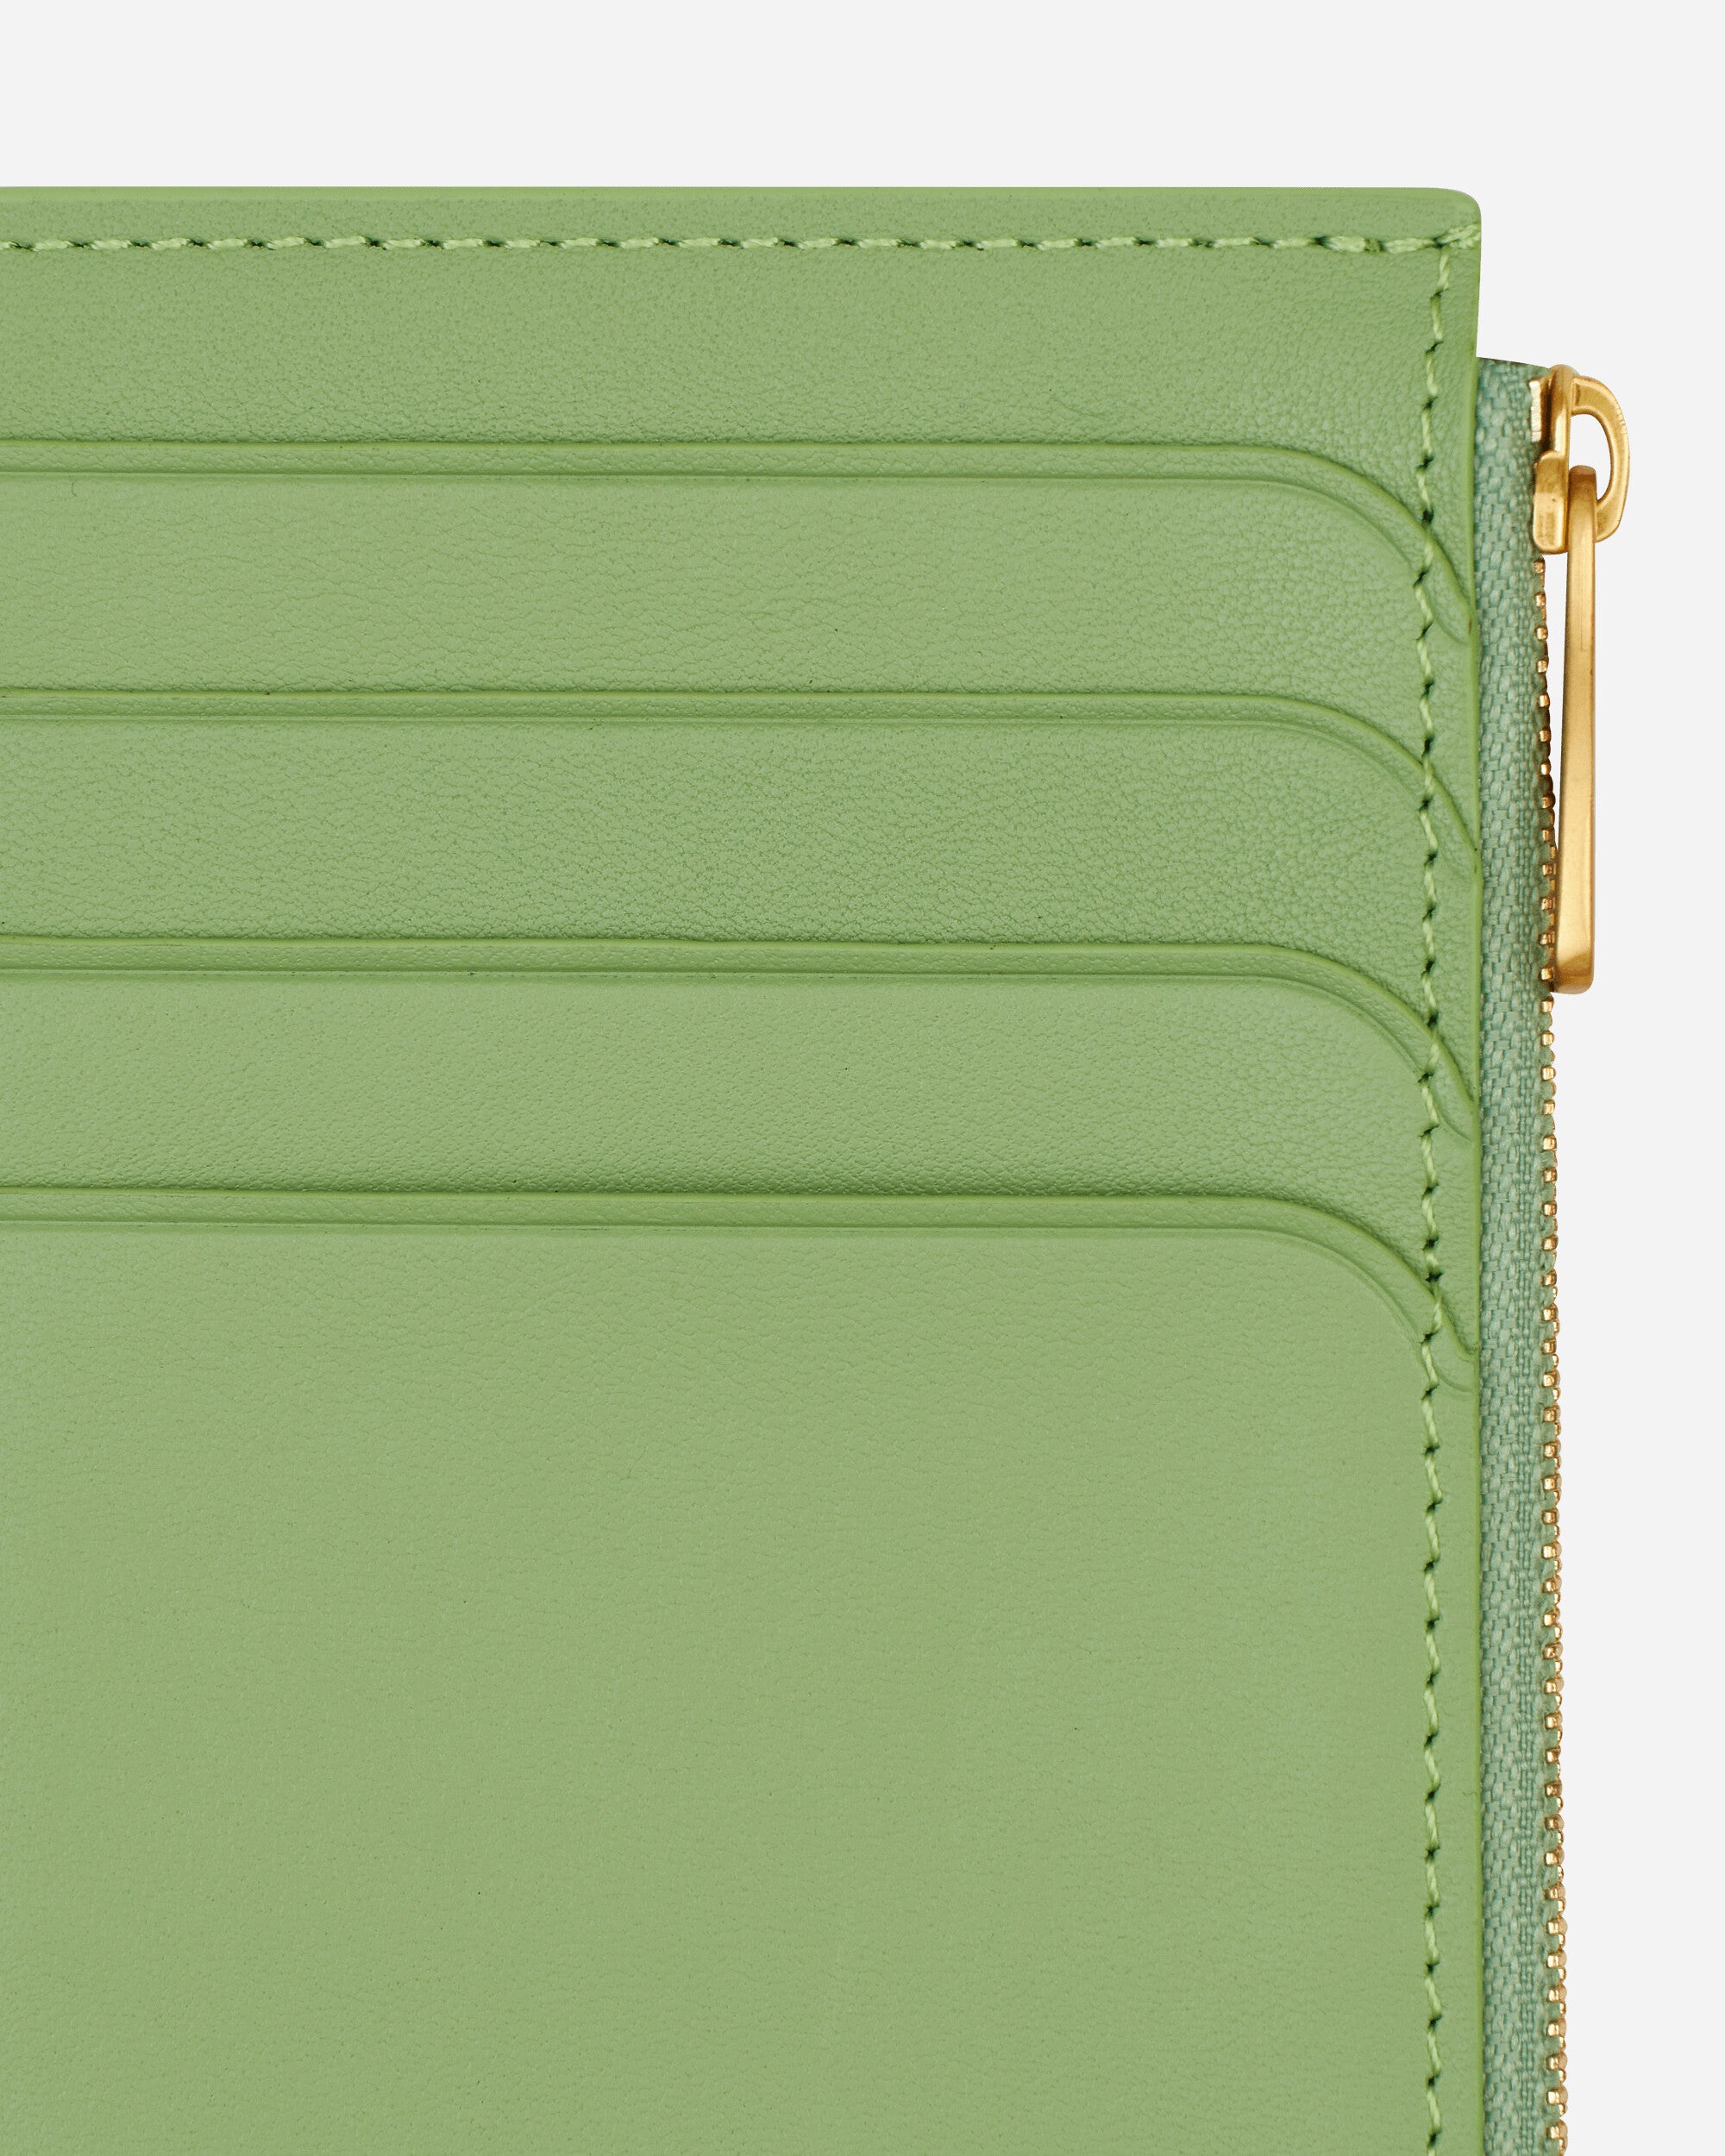 Mister Green Zippered Card Case Green Wallets and Cardholders Cardholders MGZIPCARDCASE 001